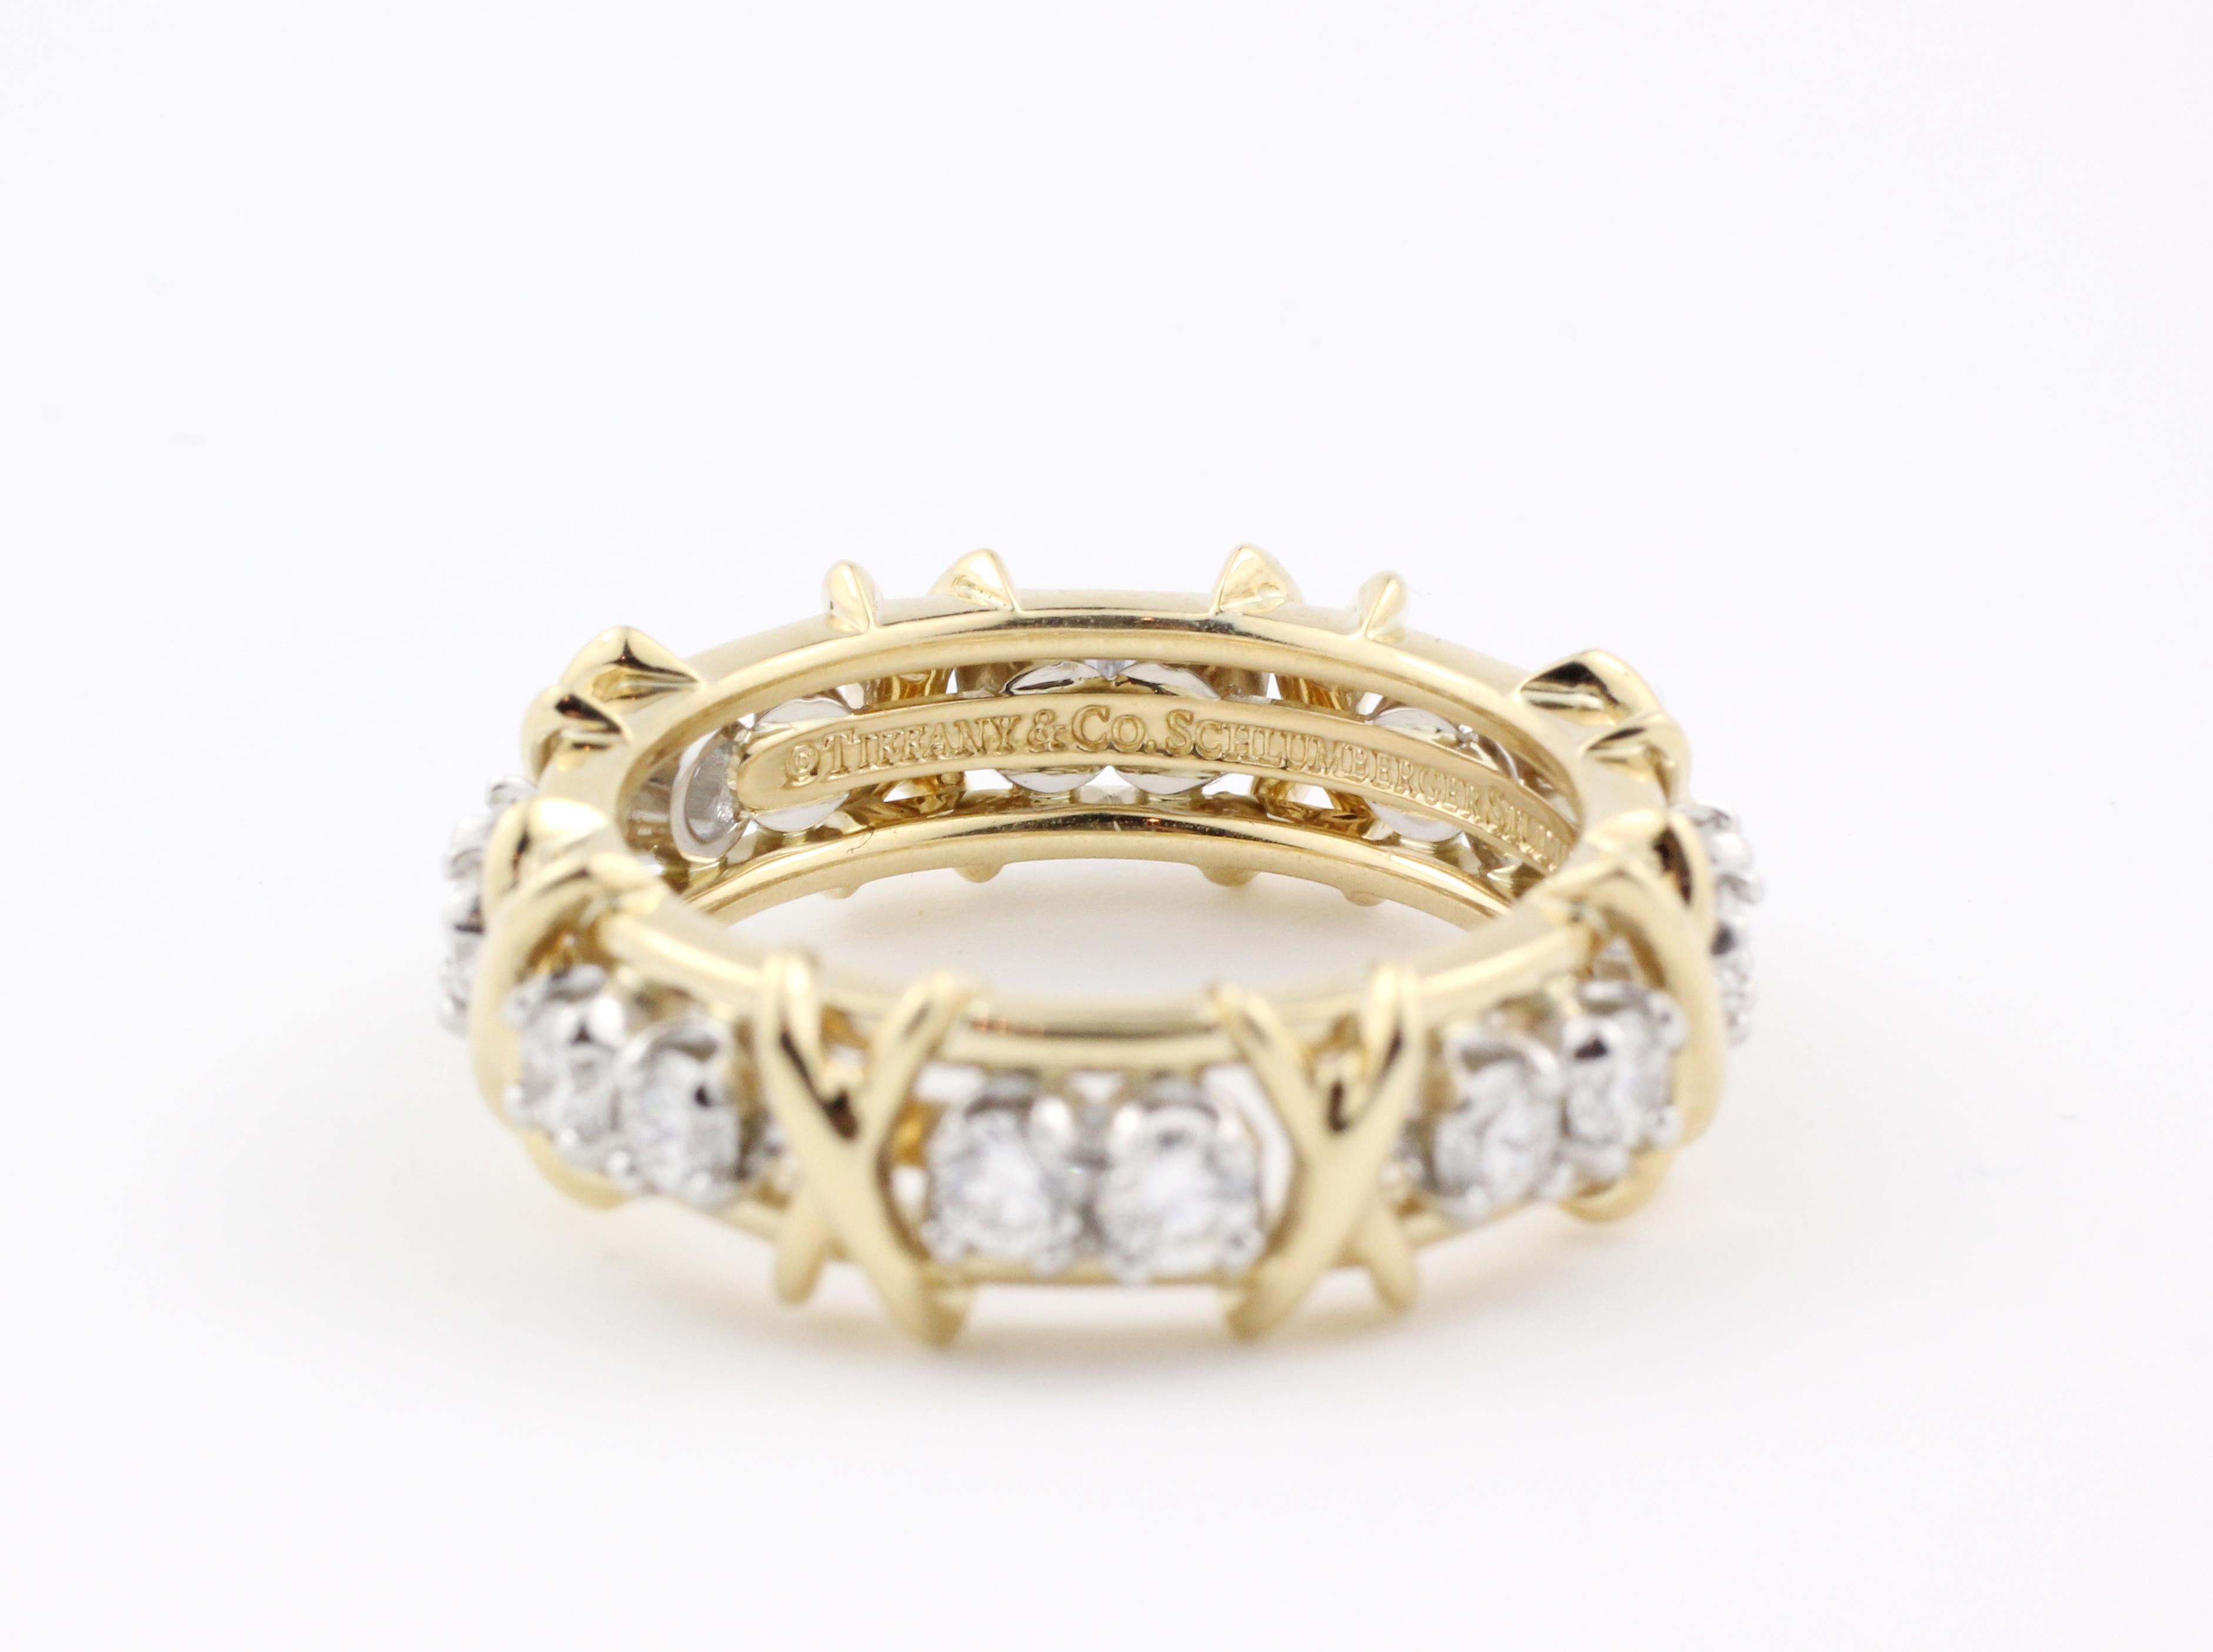 Contemporary Tiffany & Co. Gold and Platinum Schlumberger Diamond Ring